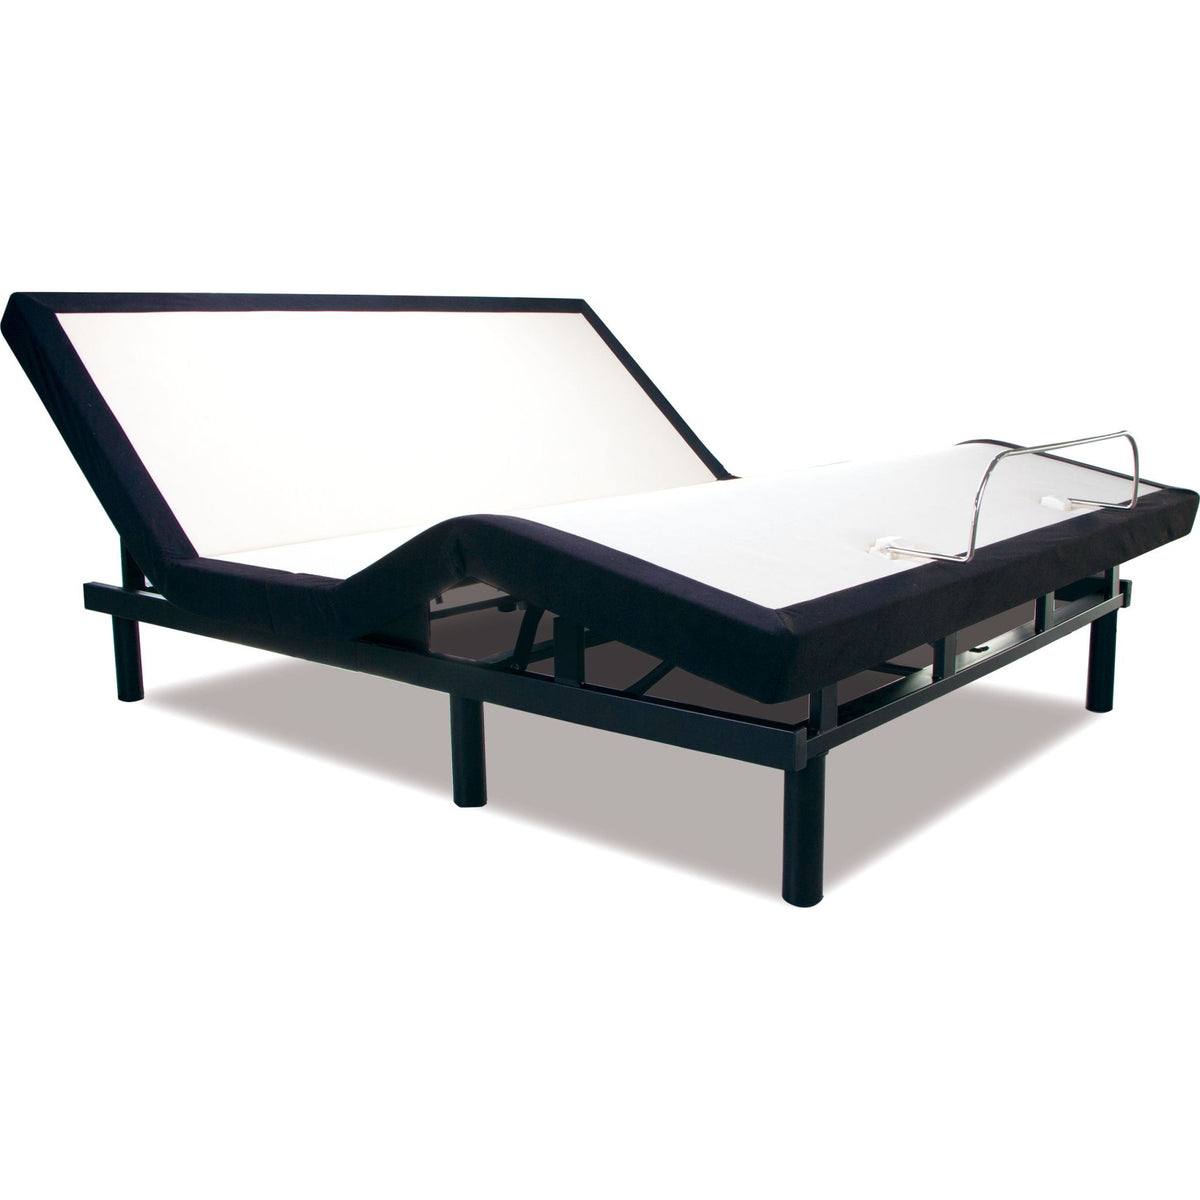 Sealy Reflexion® Boost 2.0 Lifestyle Adjustable Bed - Queen – Sealy  Reflexion® Boost 2.0 Lifestyle Adjustable Bed